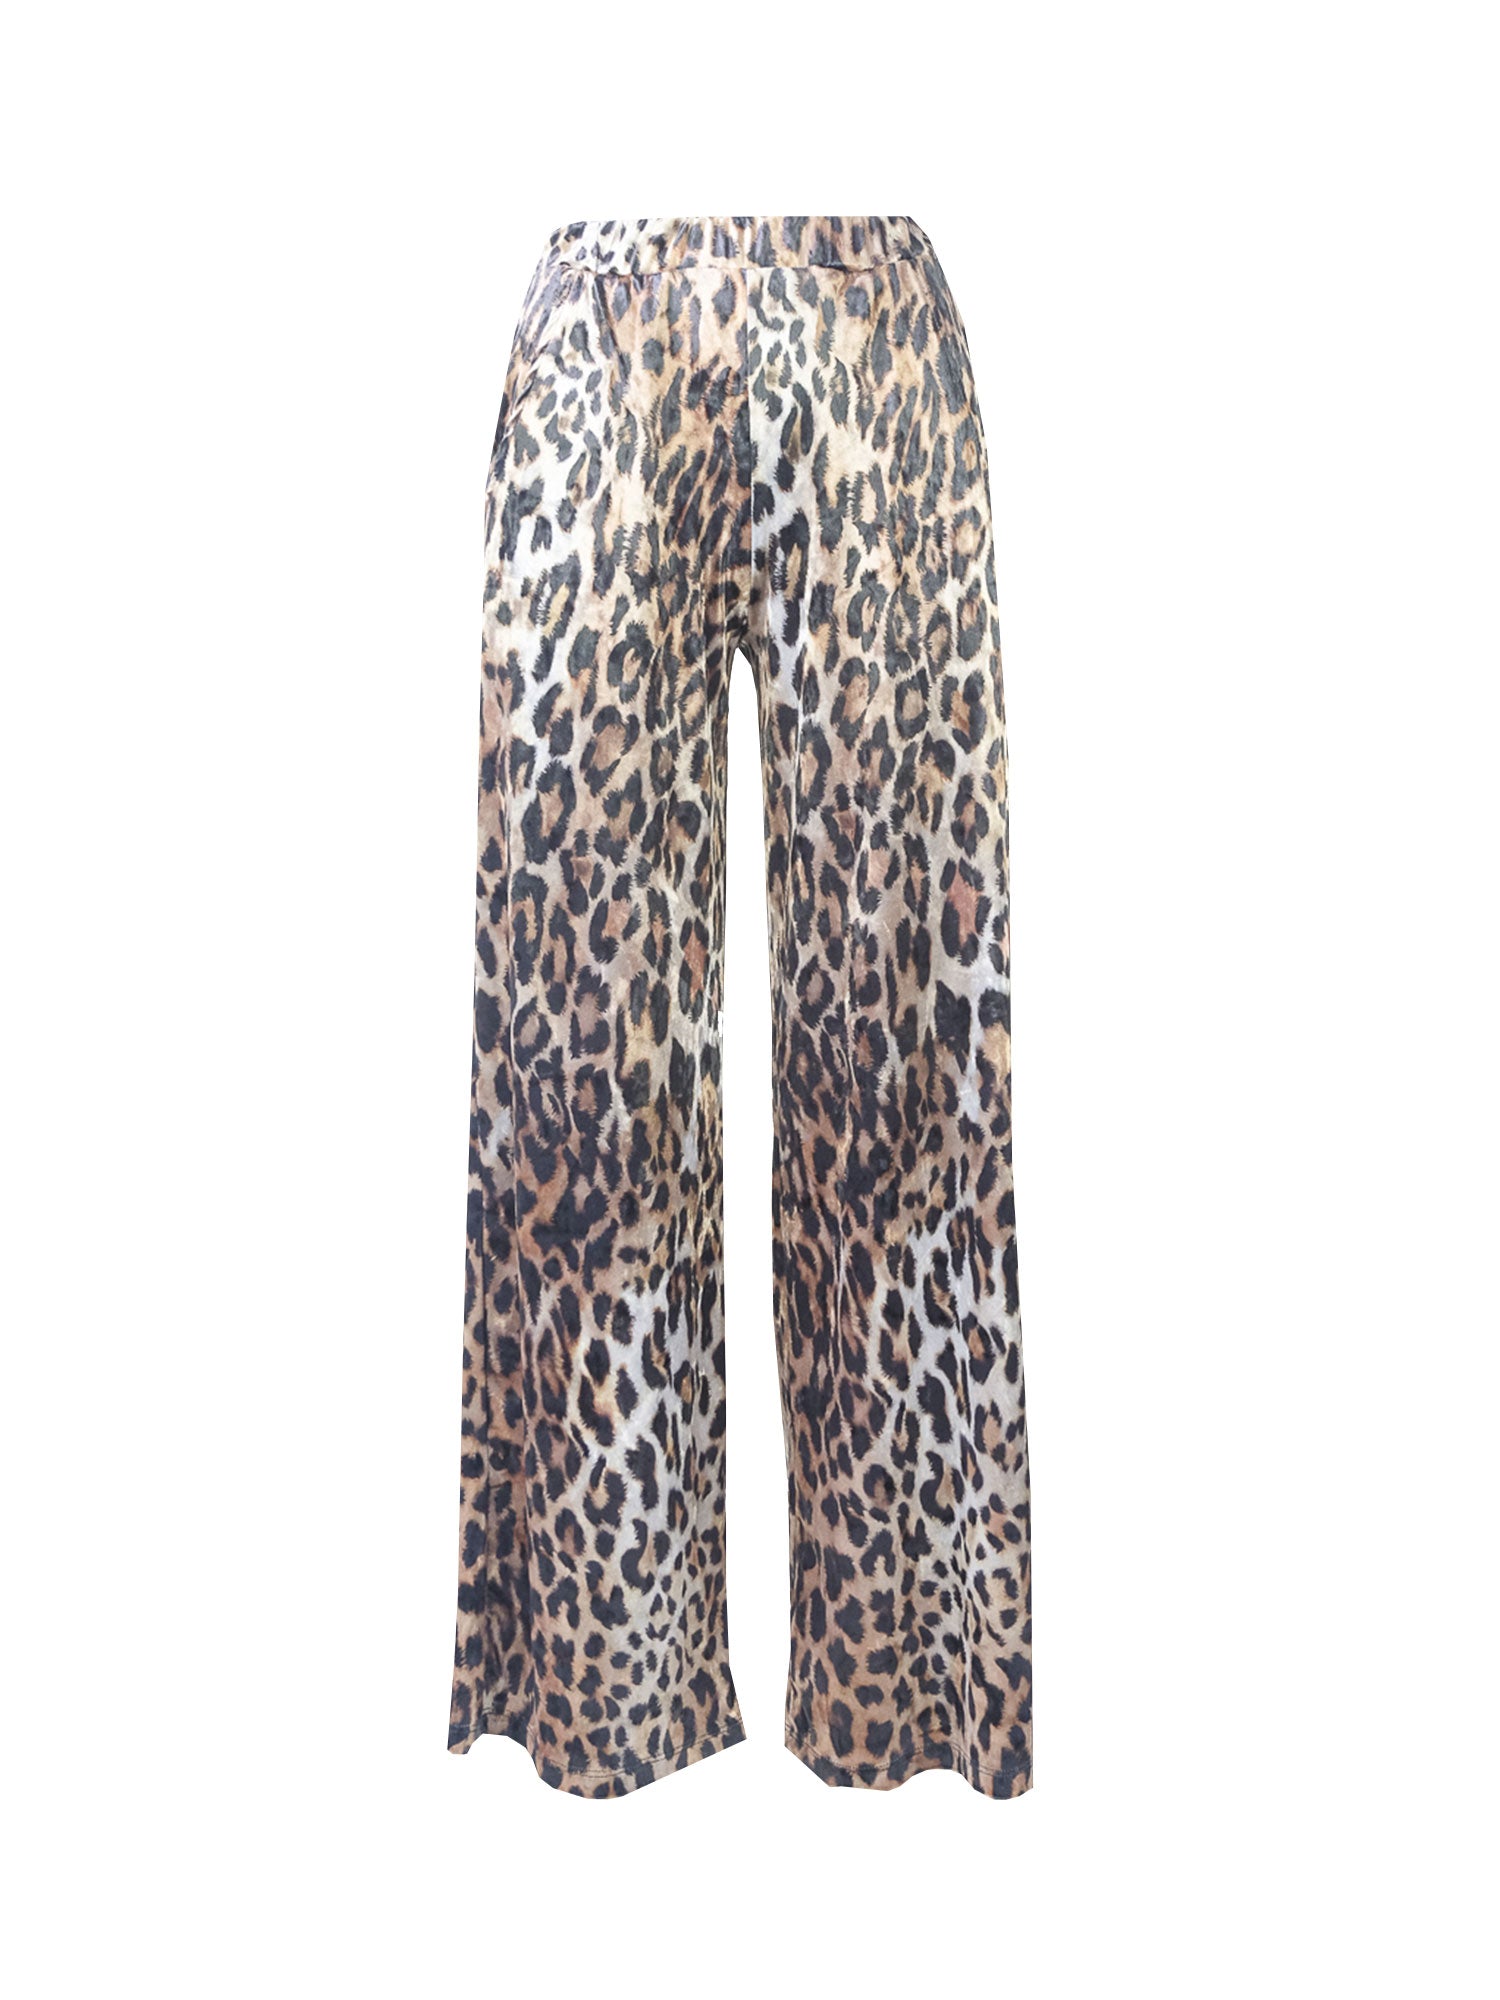 MAXIE - palazzo trousers with side pockets in animalier hammered chenille